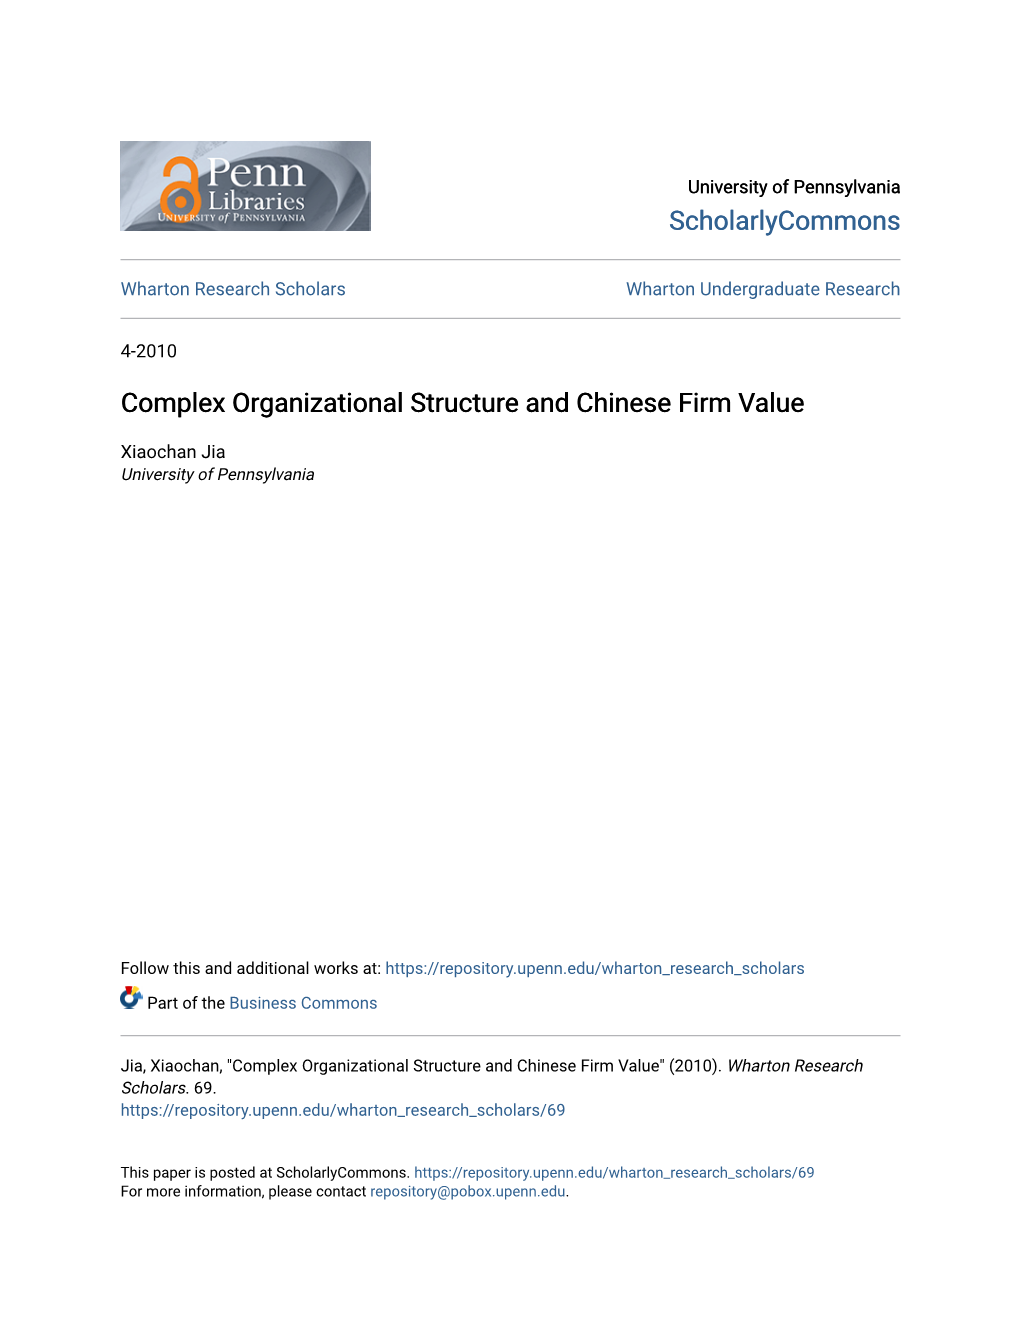 Complex Organizational Structure and Chinese Firm Value